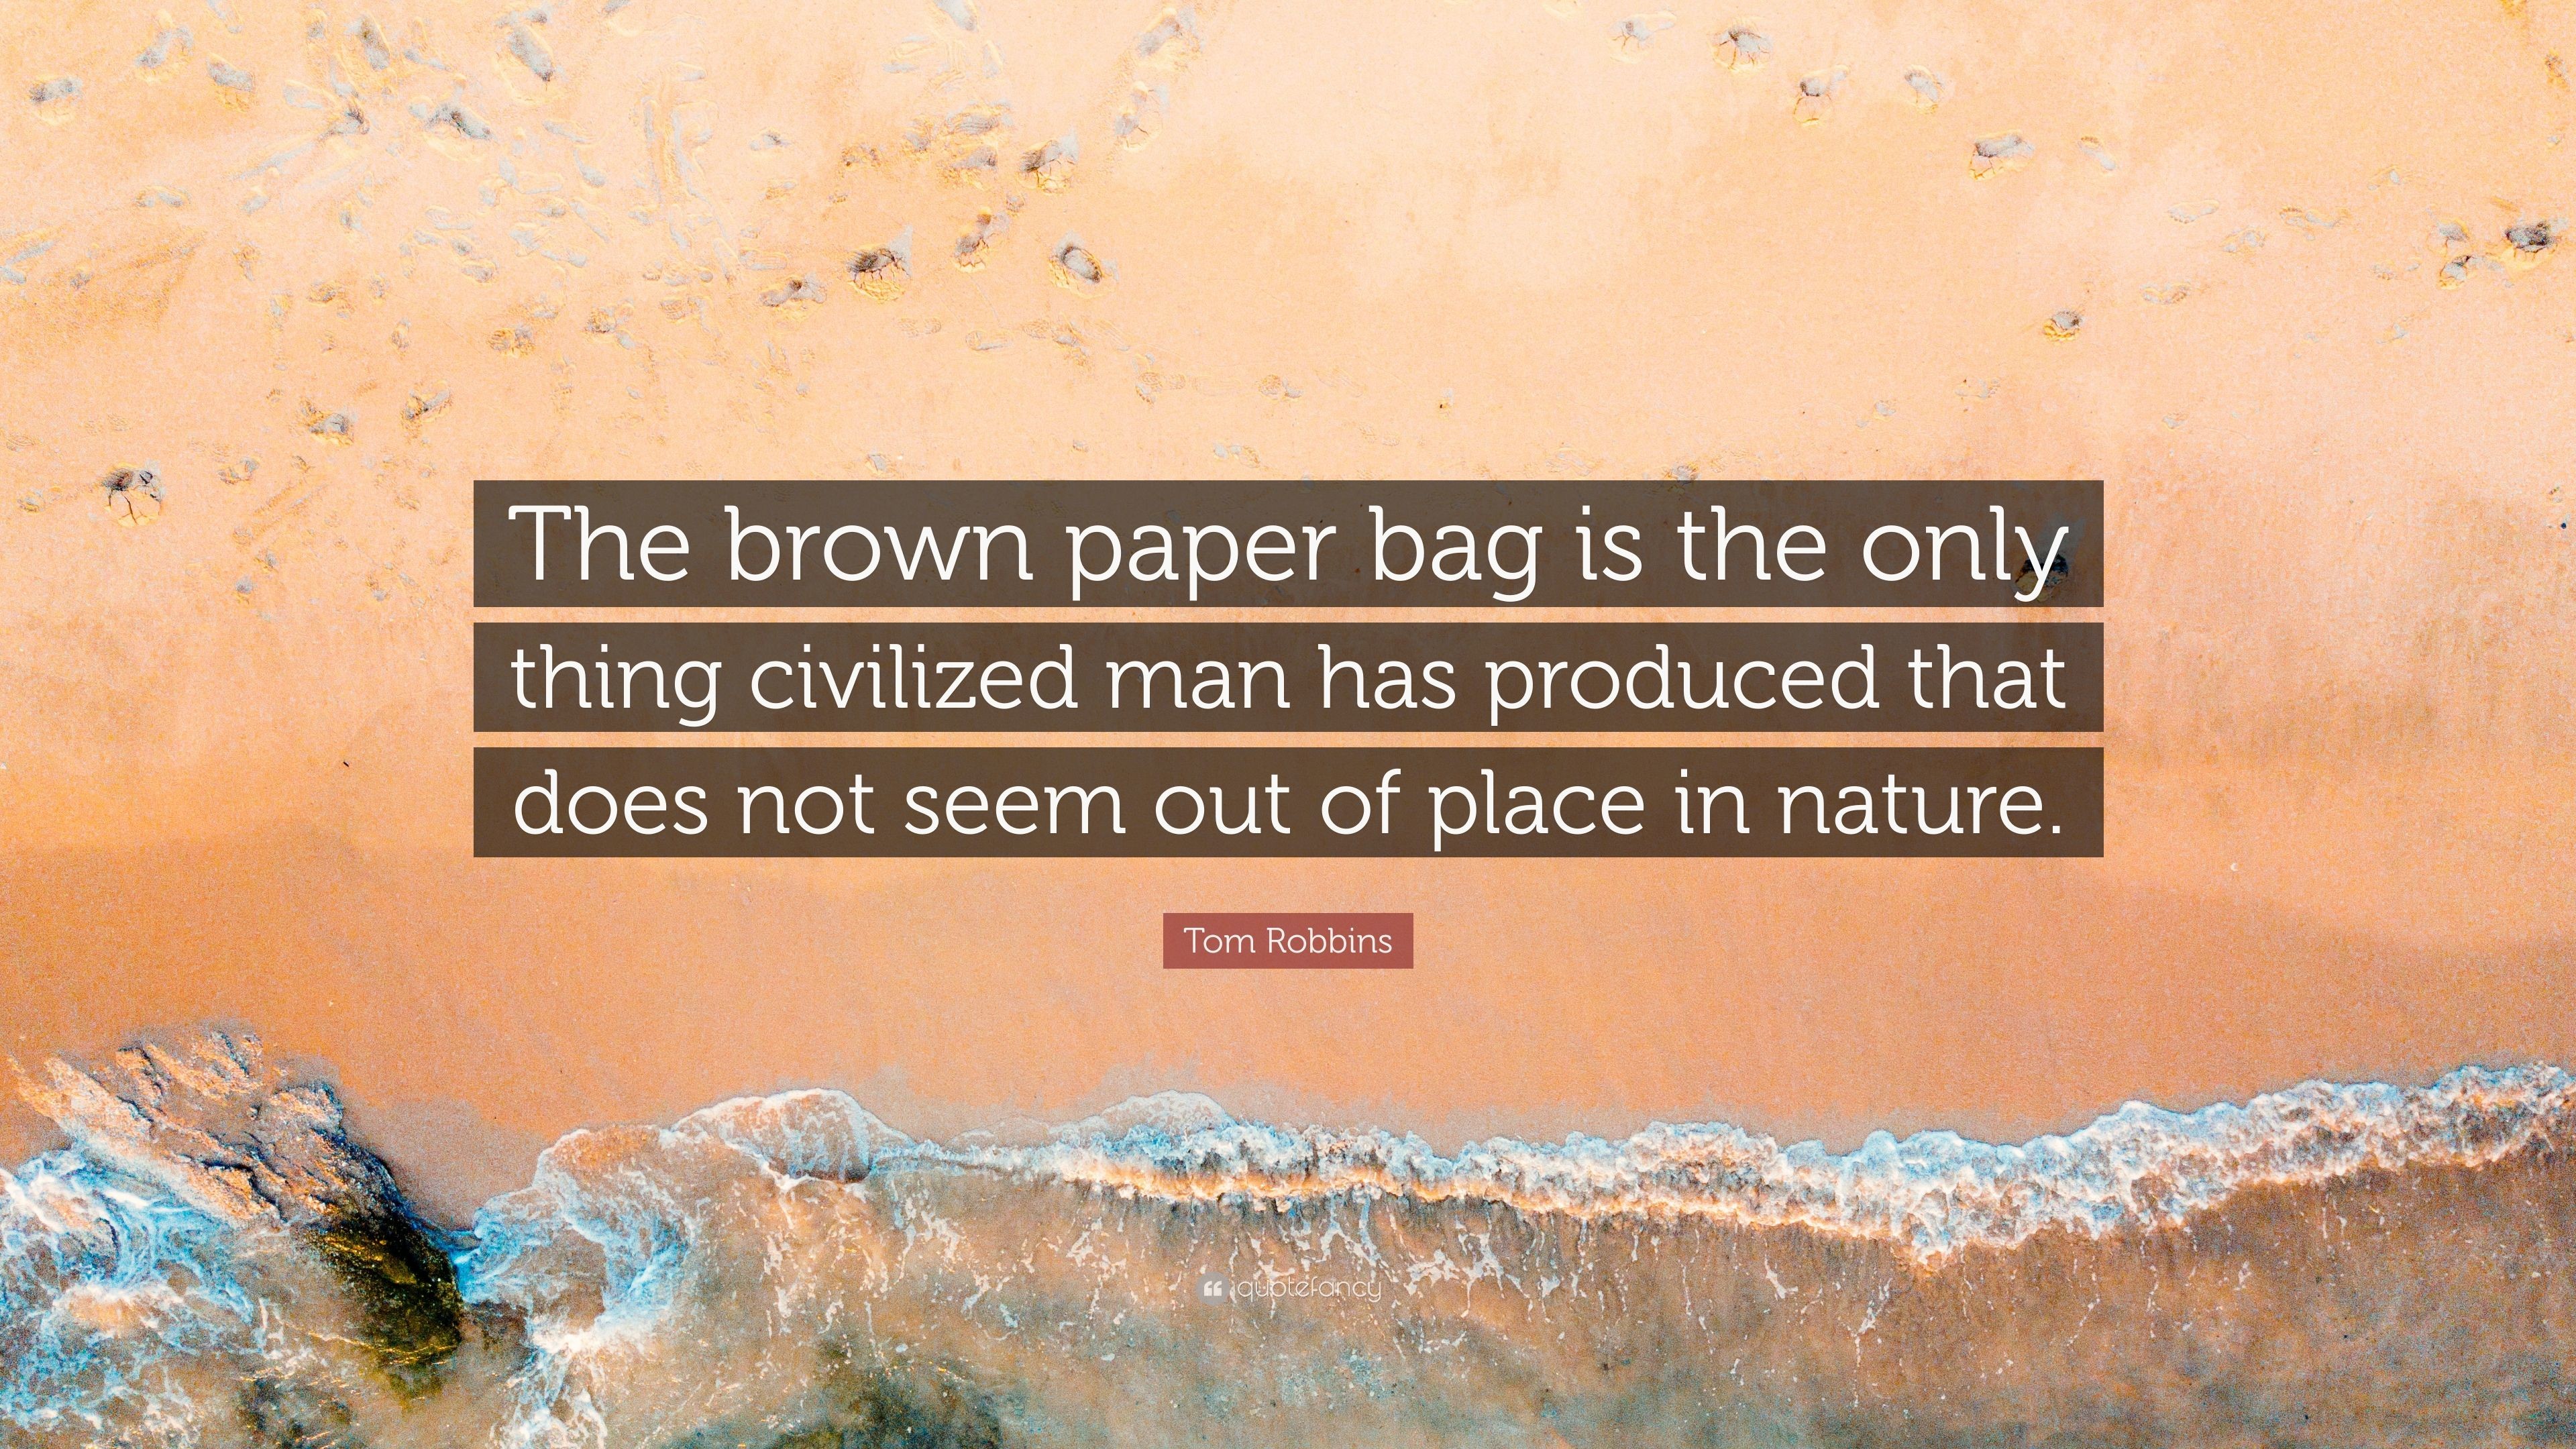 3840x2160 Tom Robbins Quote: “The brown paper bag is the only thing civilized man has